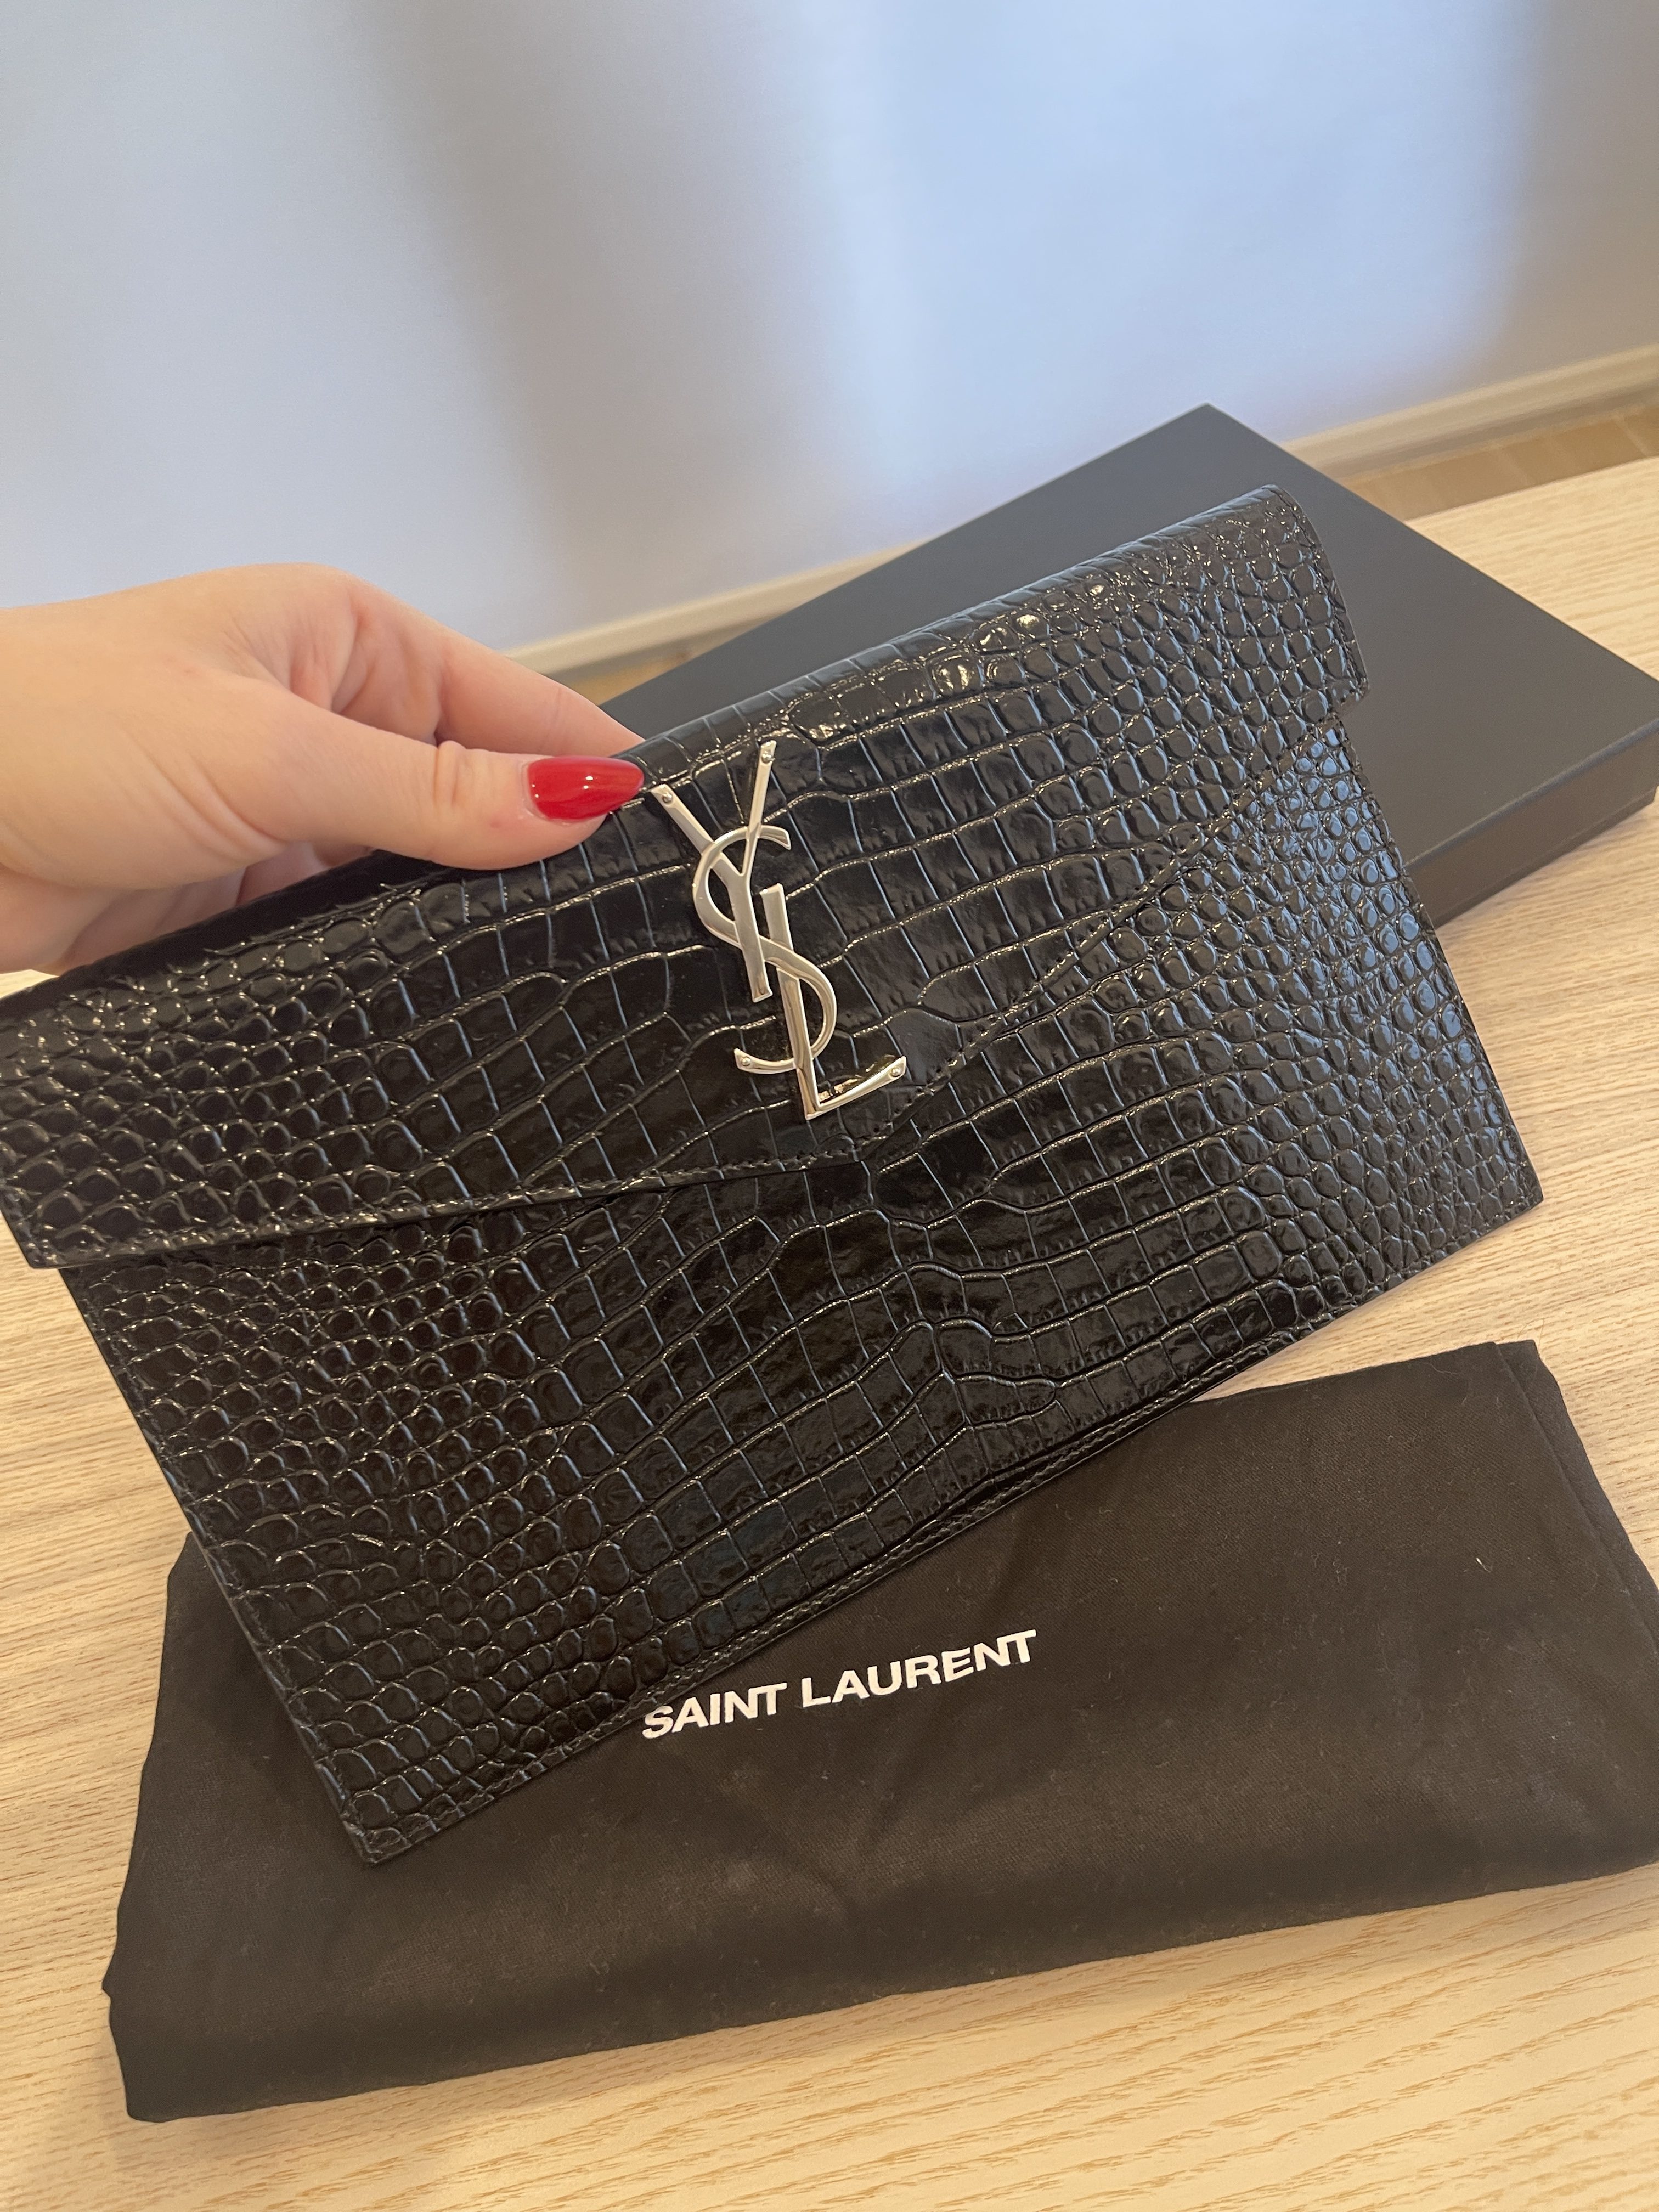 Saint Laurent Uptown Pouch in Crocodile Embossed Shiny Leather Black